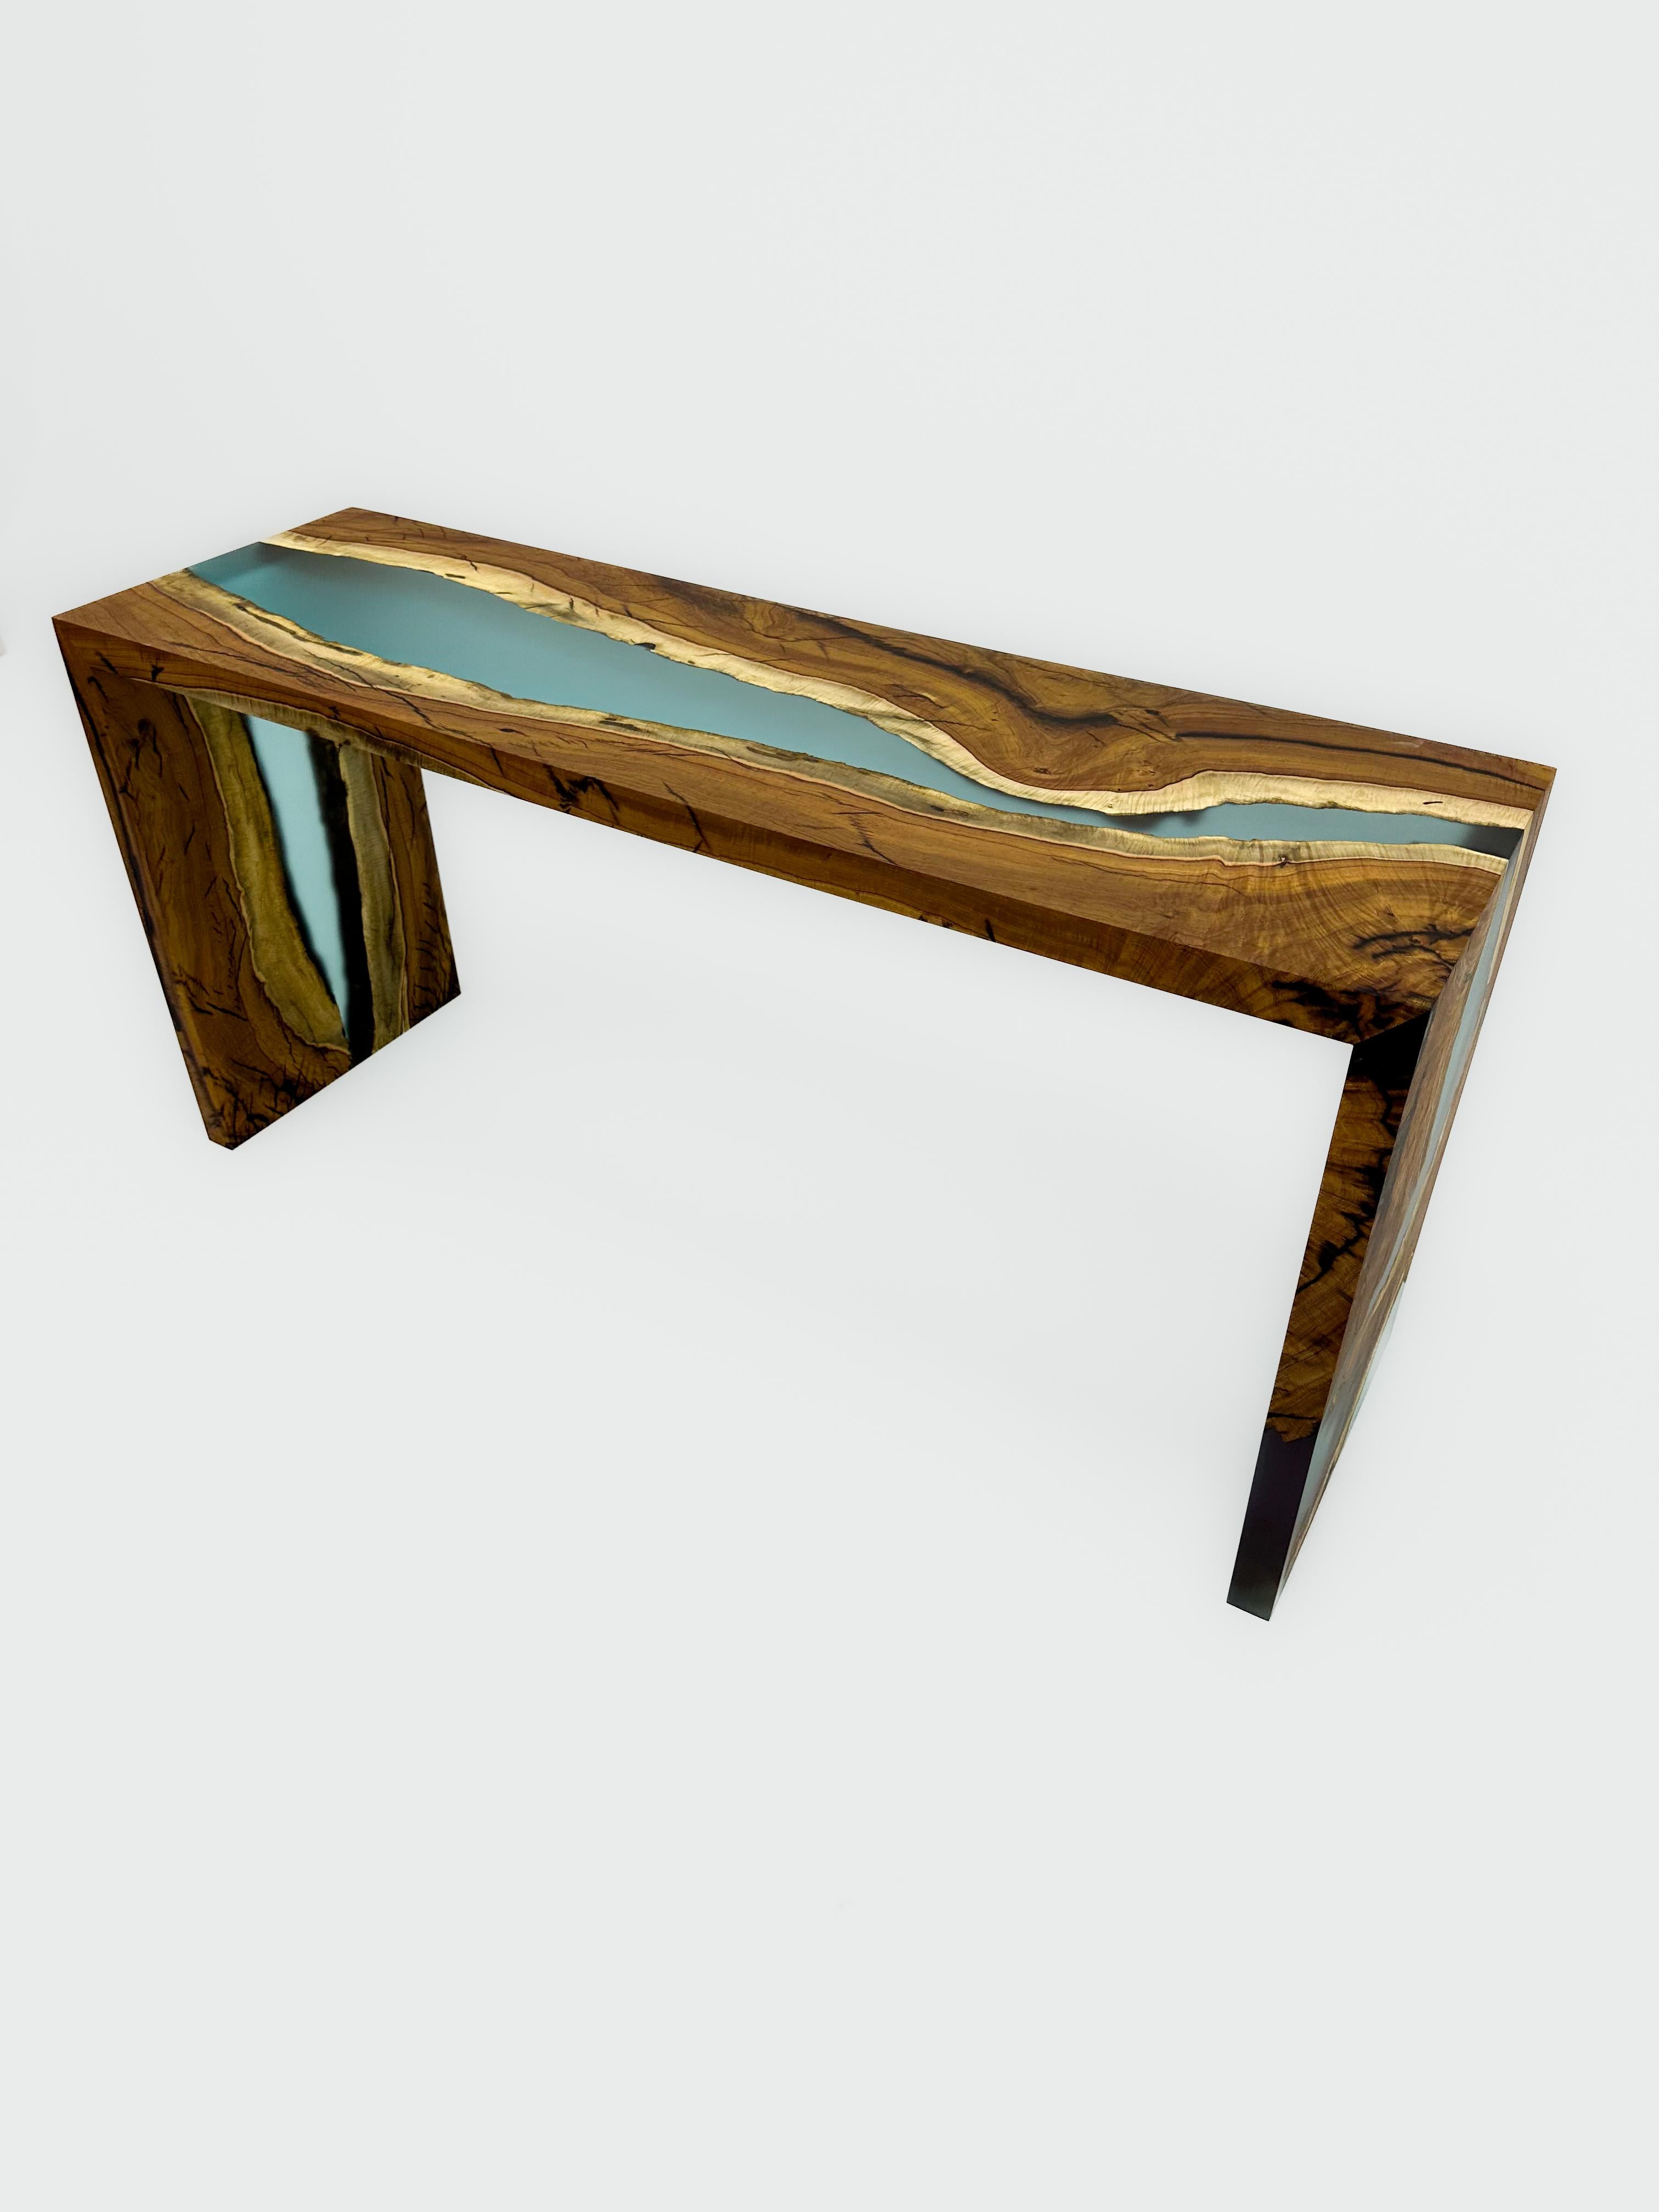 Waterfall Hackberry Epoxy Console Table

Presenting our Epoxy Waterfall ConsoleTable – a true sample of craftsmanship and elegance. This exceptional piece of furniture is designed to be more than just a coffee table; it's a statement of refined